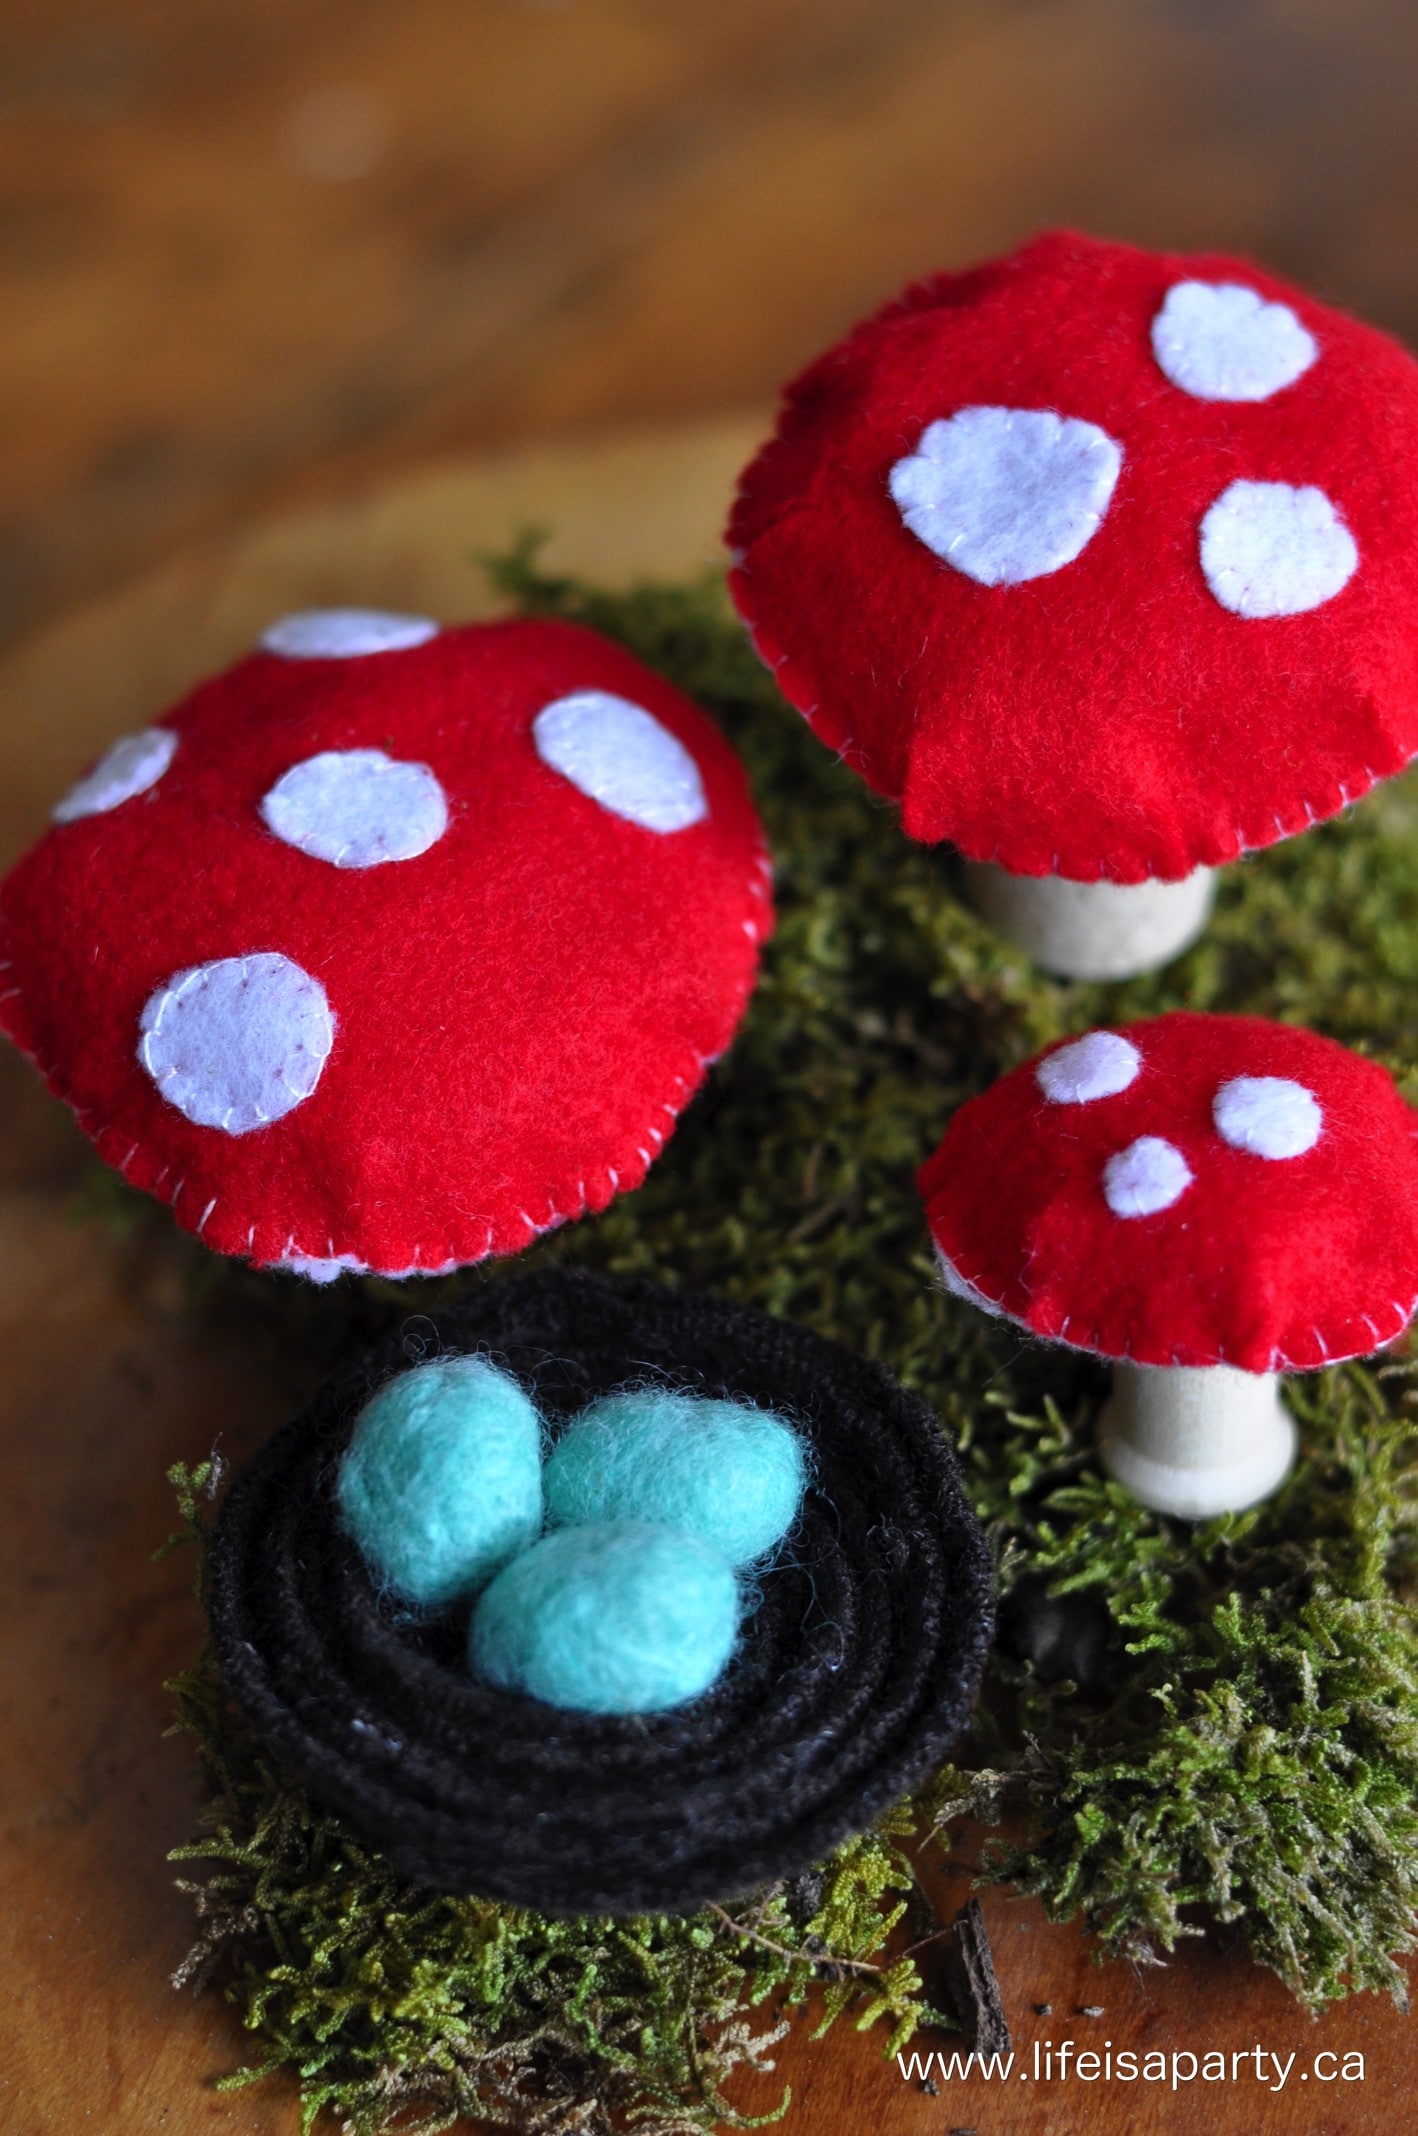 DIY Wine Cork and Wooden Spool Felt Mushrooms: so easy to stitch together, add a little whimsy to your spring decor.